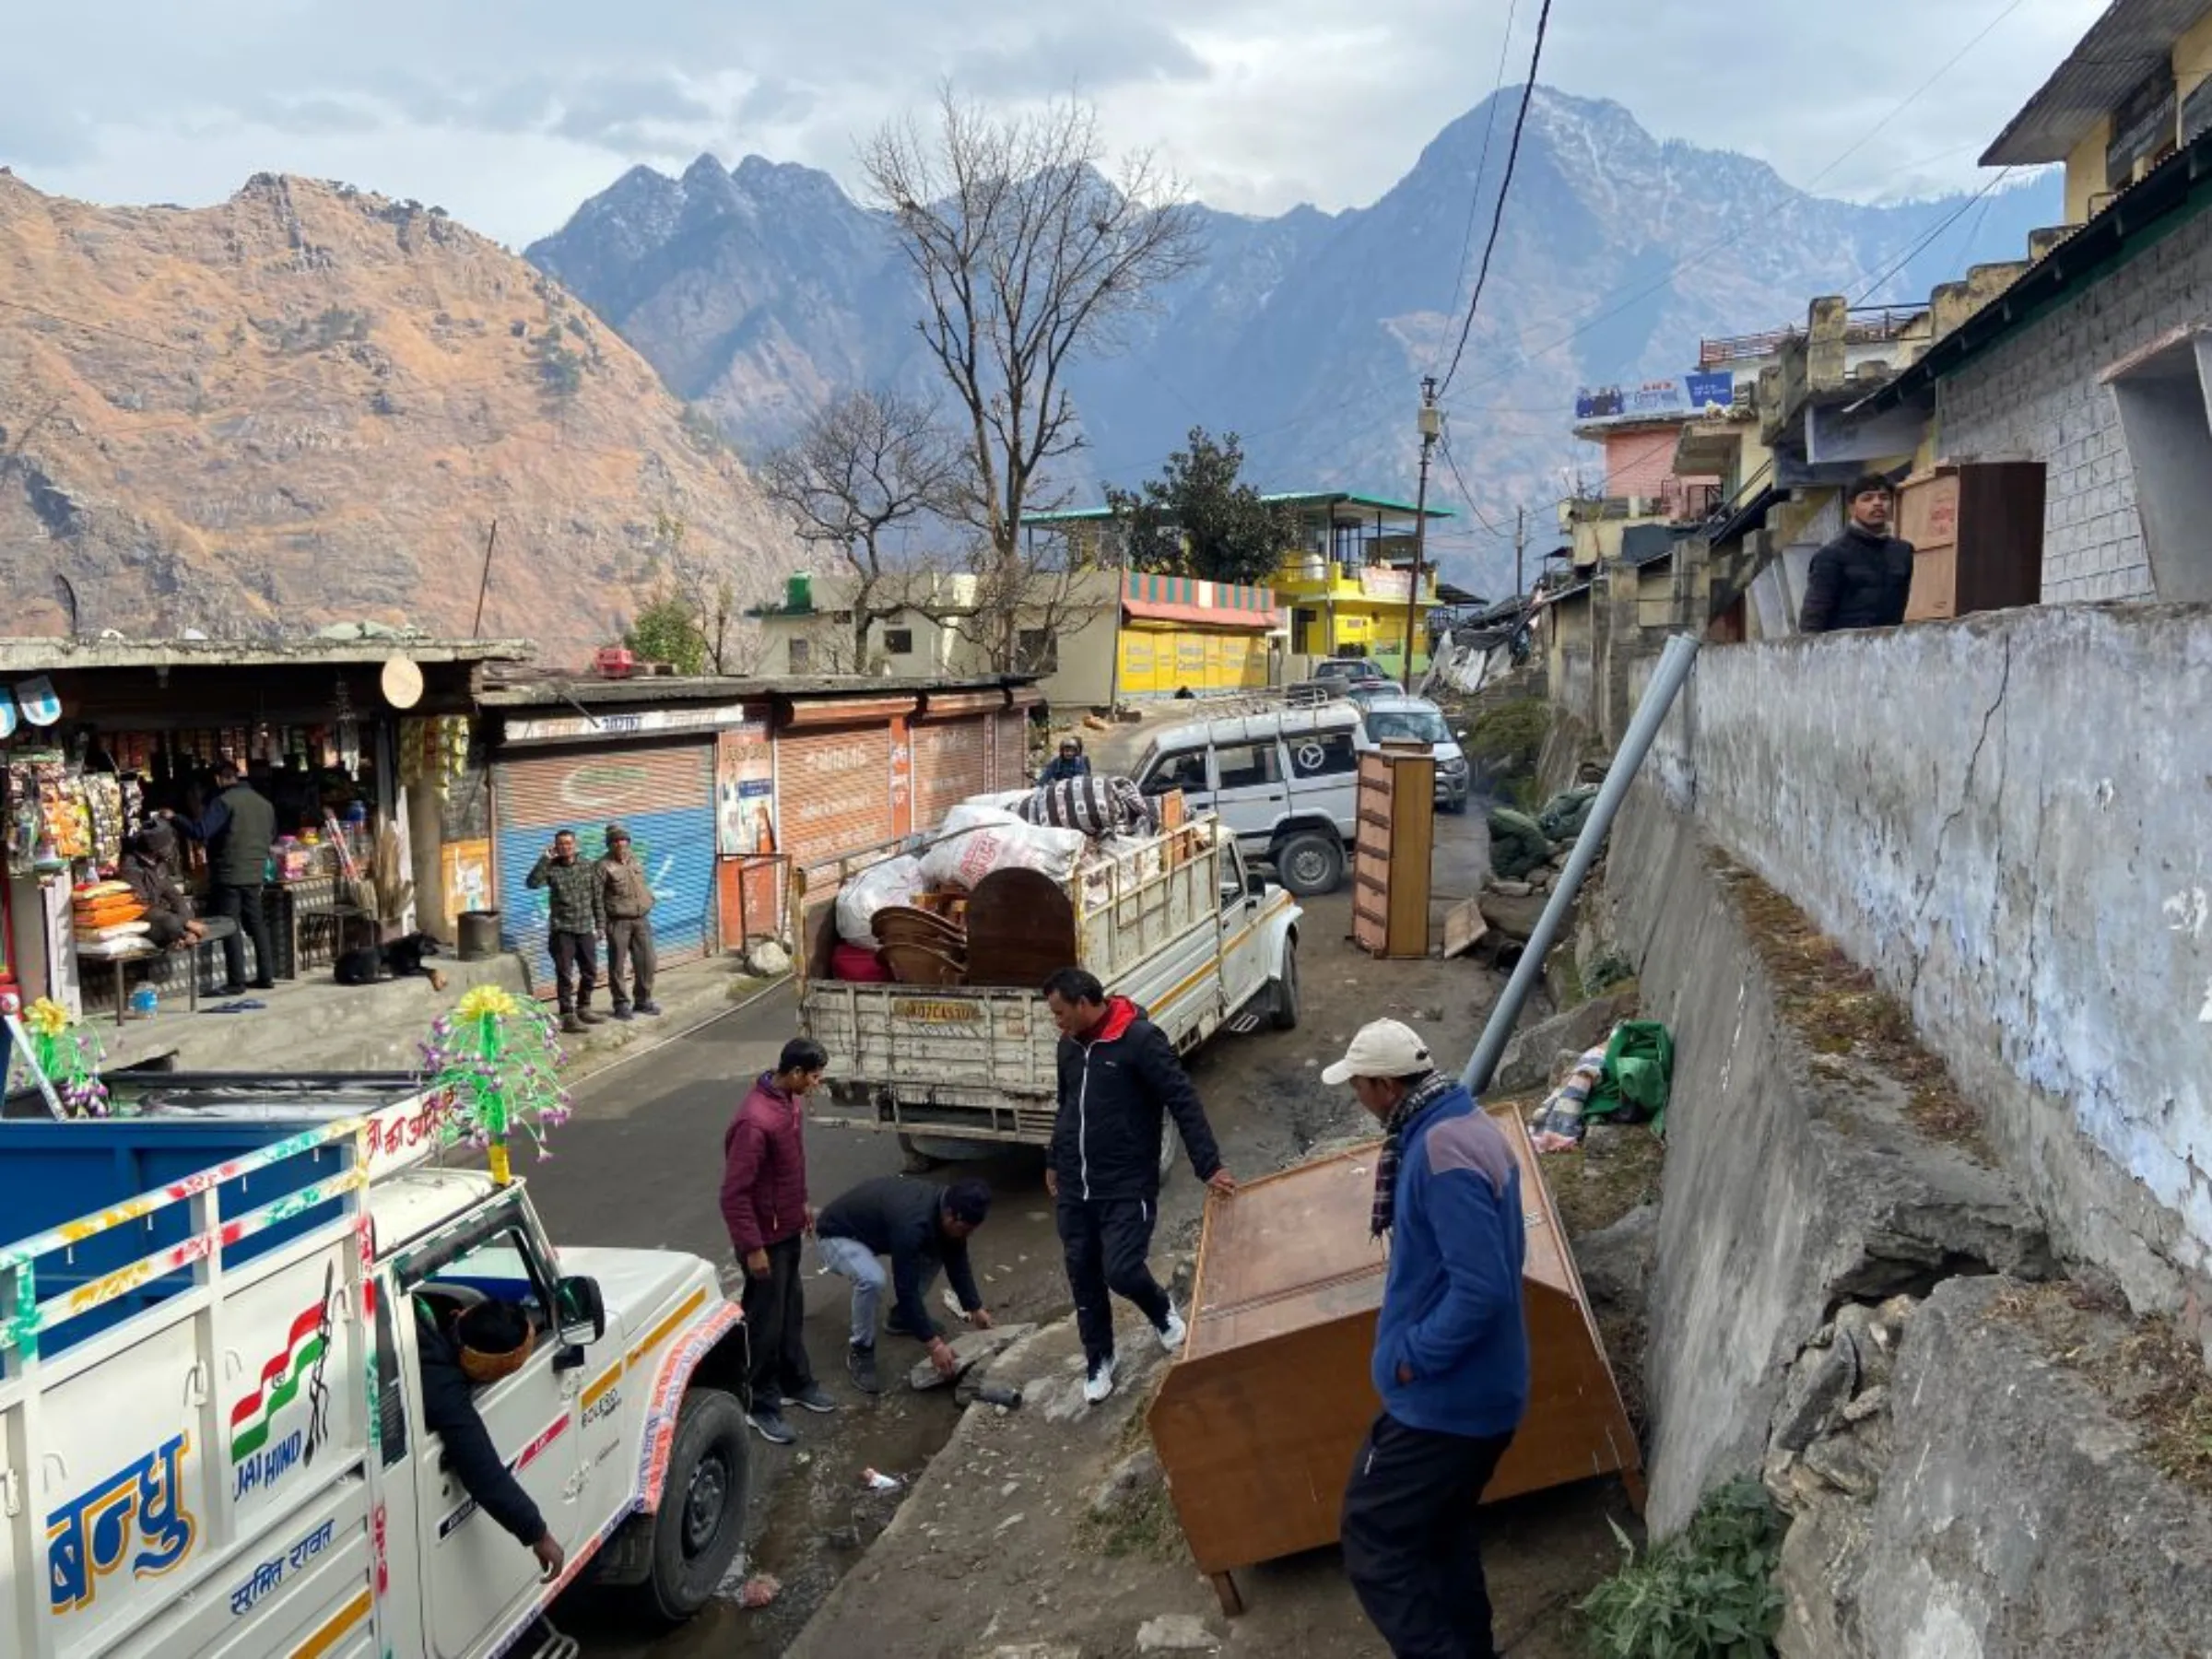 People load household belongings on a lorry as they leave their crumbling home in the Himalayan town of Joshimath, India, January 12, 2023